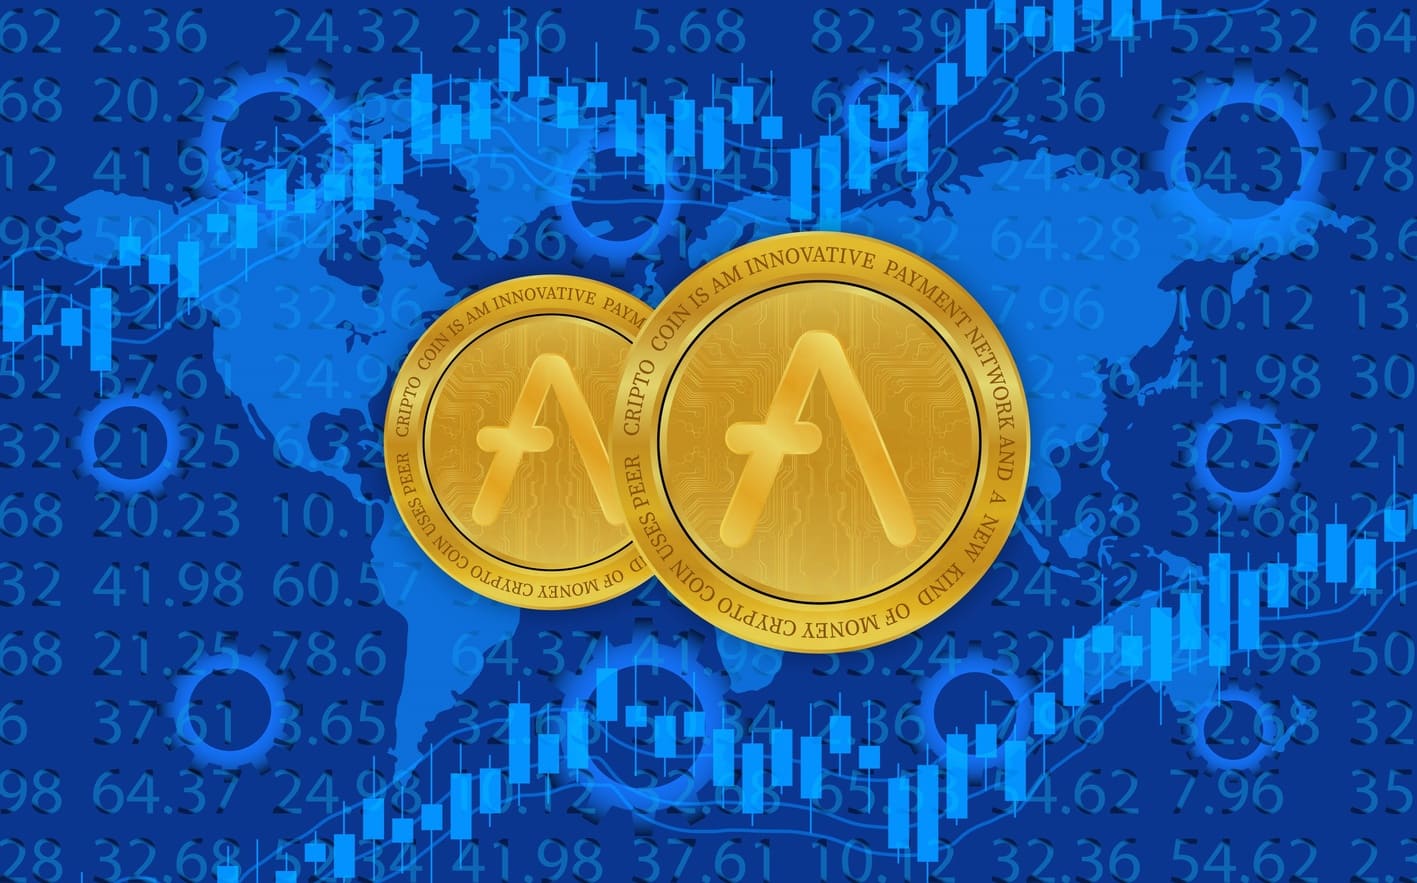 Aave launches GHO, a new algorithmic stablecoin backed by crypto reserves